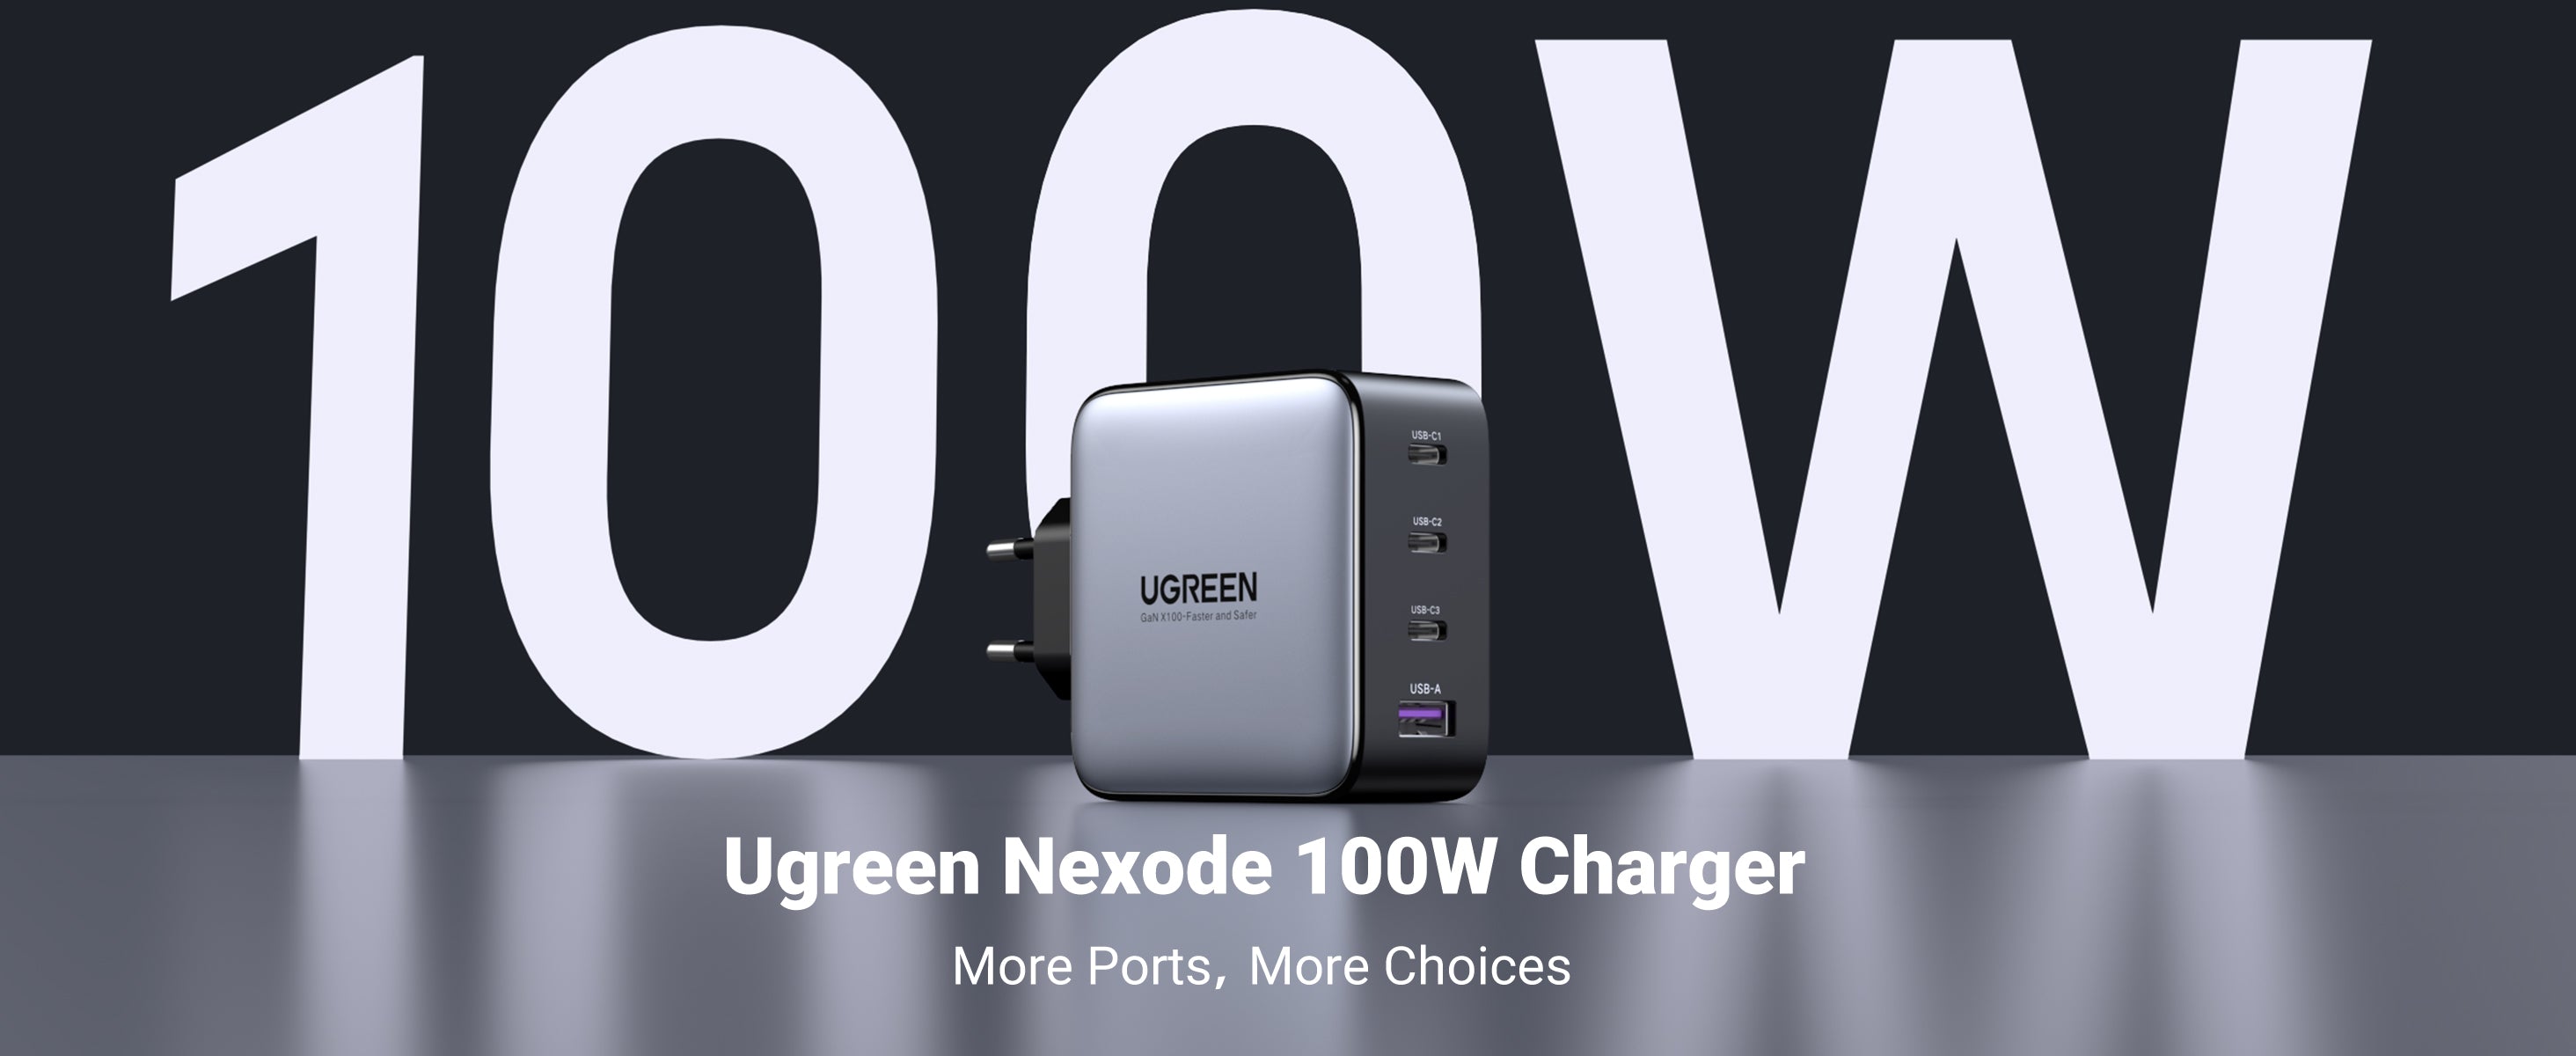 Smaller, Faster, Better  Meet the UGREEN Nexode Pro 100W 3-in-1 GaN  Charger - Chargerlab